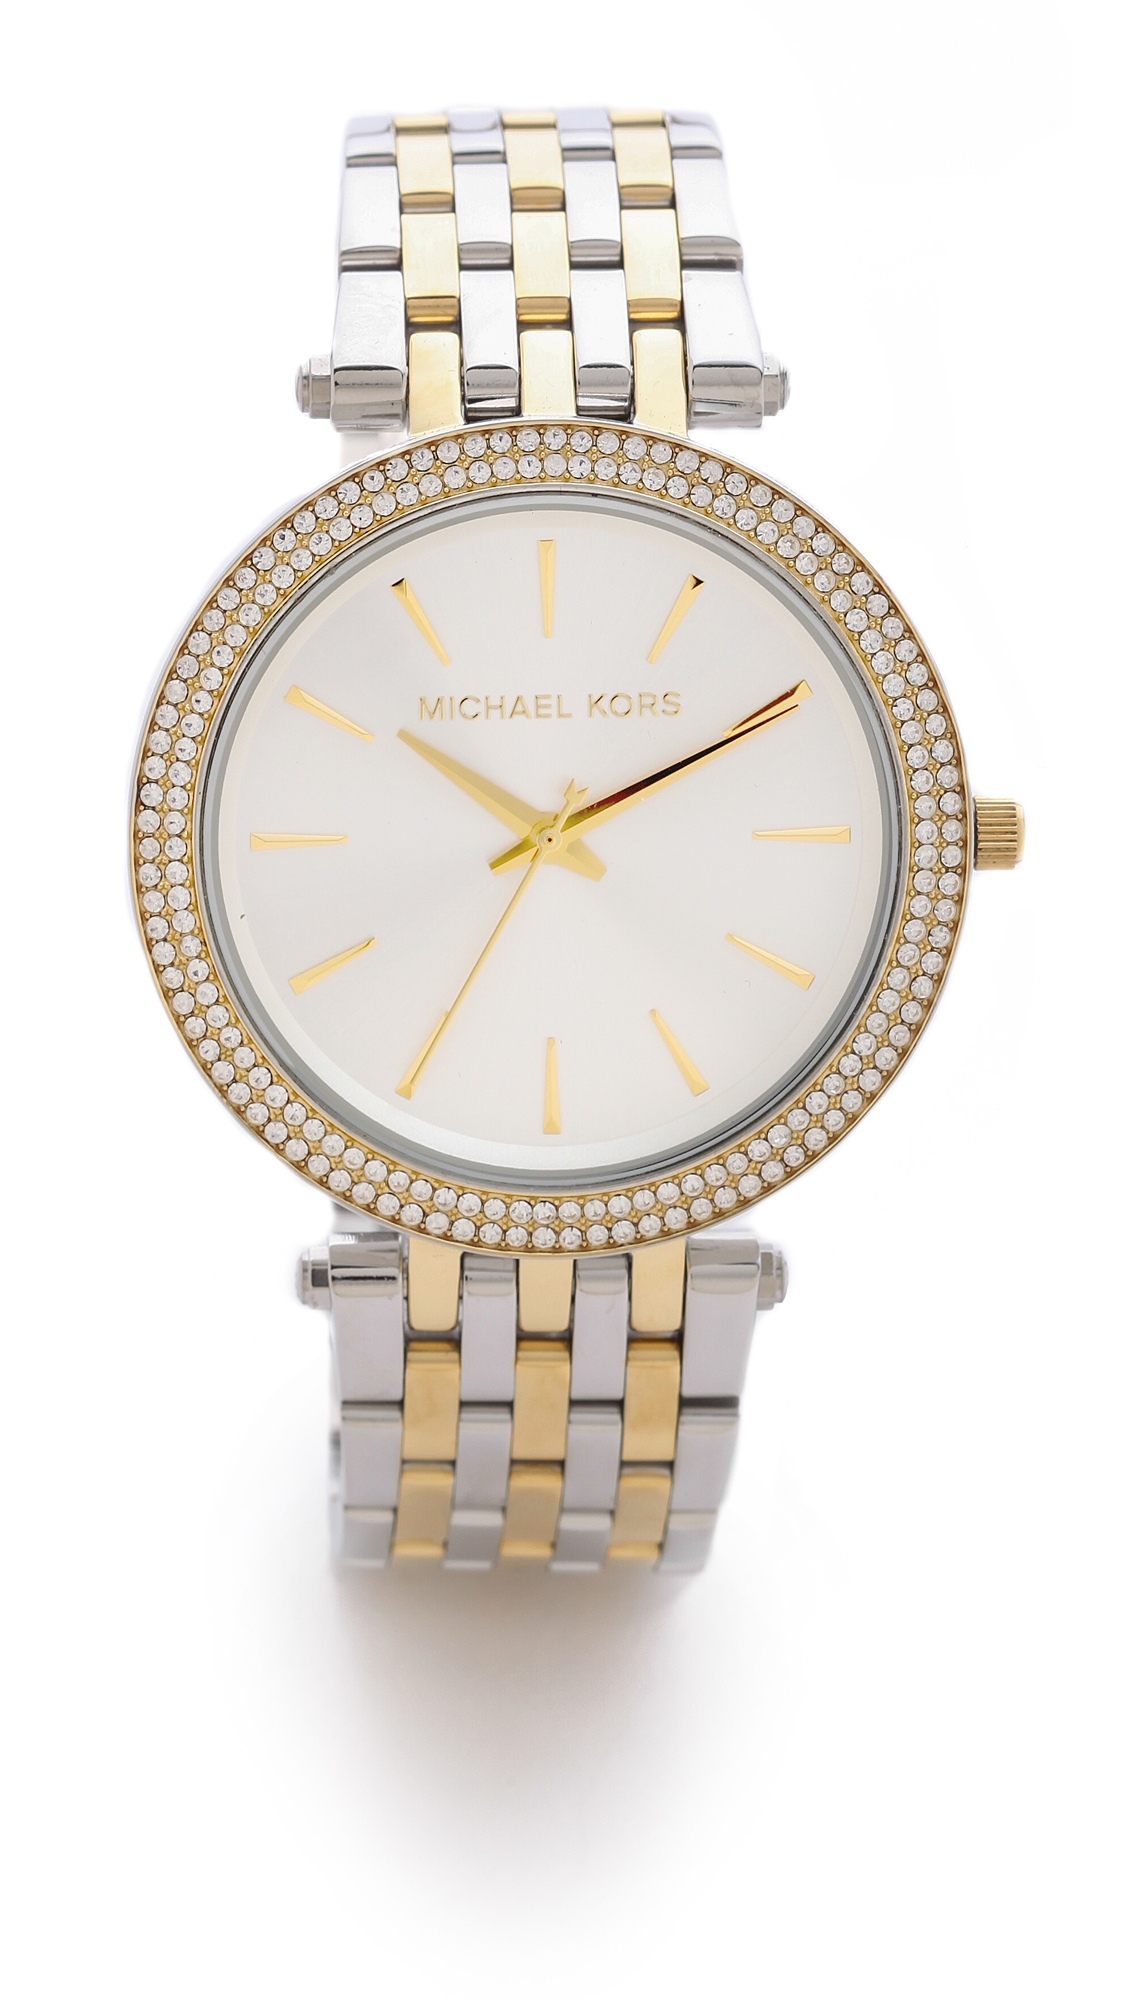 Michael Kors Darci Pave Two Tone Watch in Silver/Gold (Metallic 